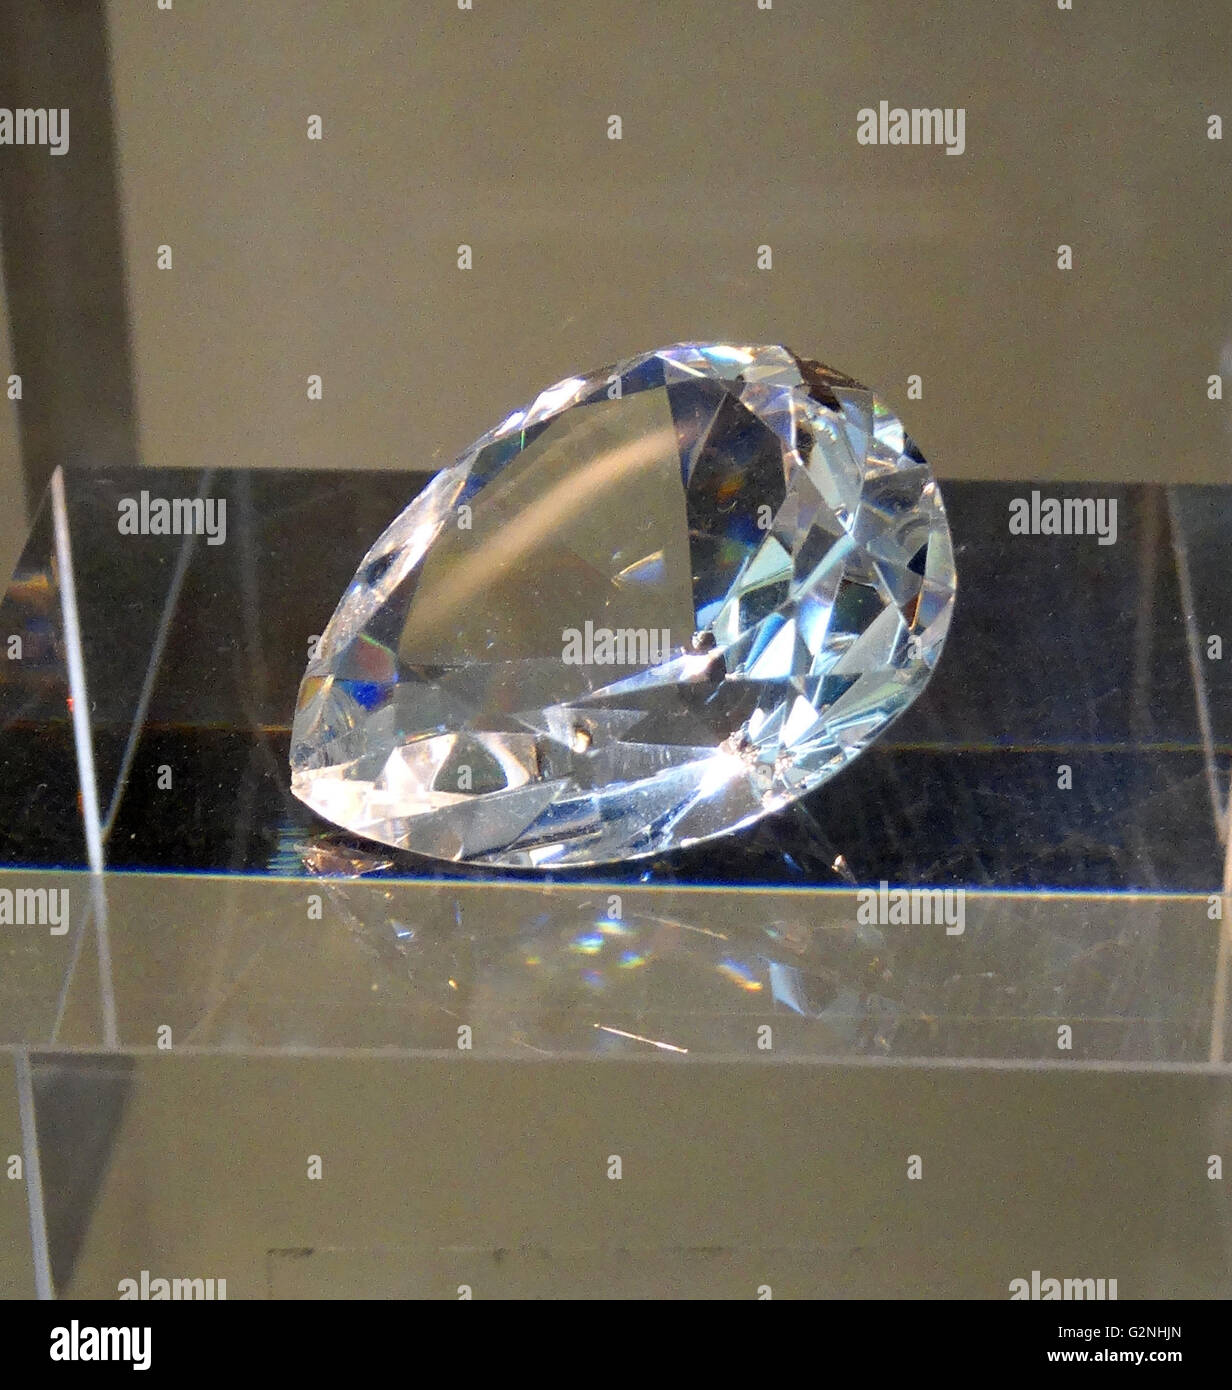 Cullinan V Diamond. A Cullinan Diamond found in South Africa and measured at 18.85 Carats. Dated 2014 Stock Photo